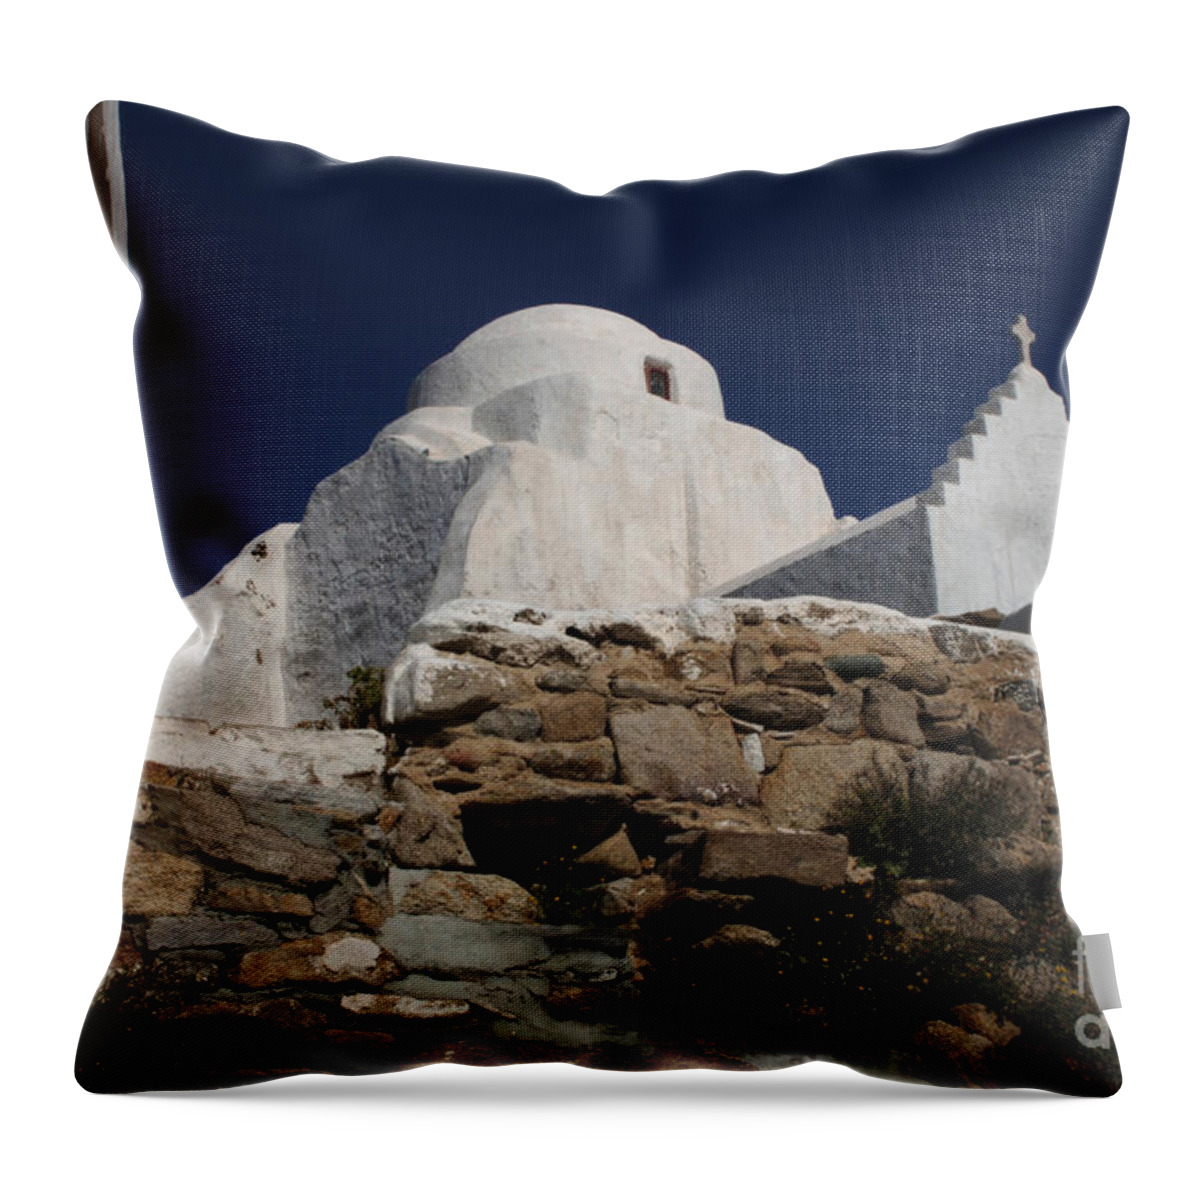 Greece Throw Pillow featuring the photograph Church On Mykonos 2 by Bob Christopher